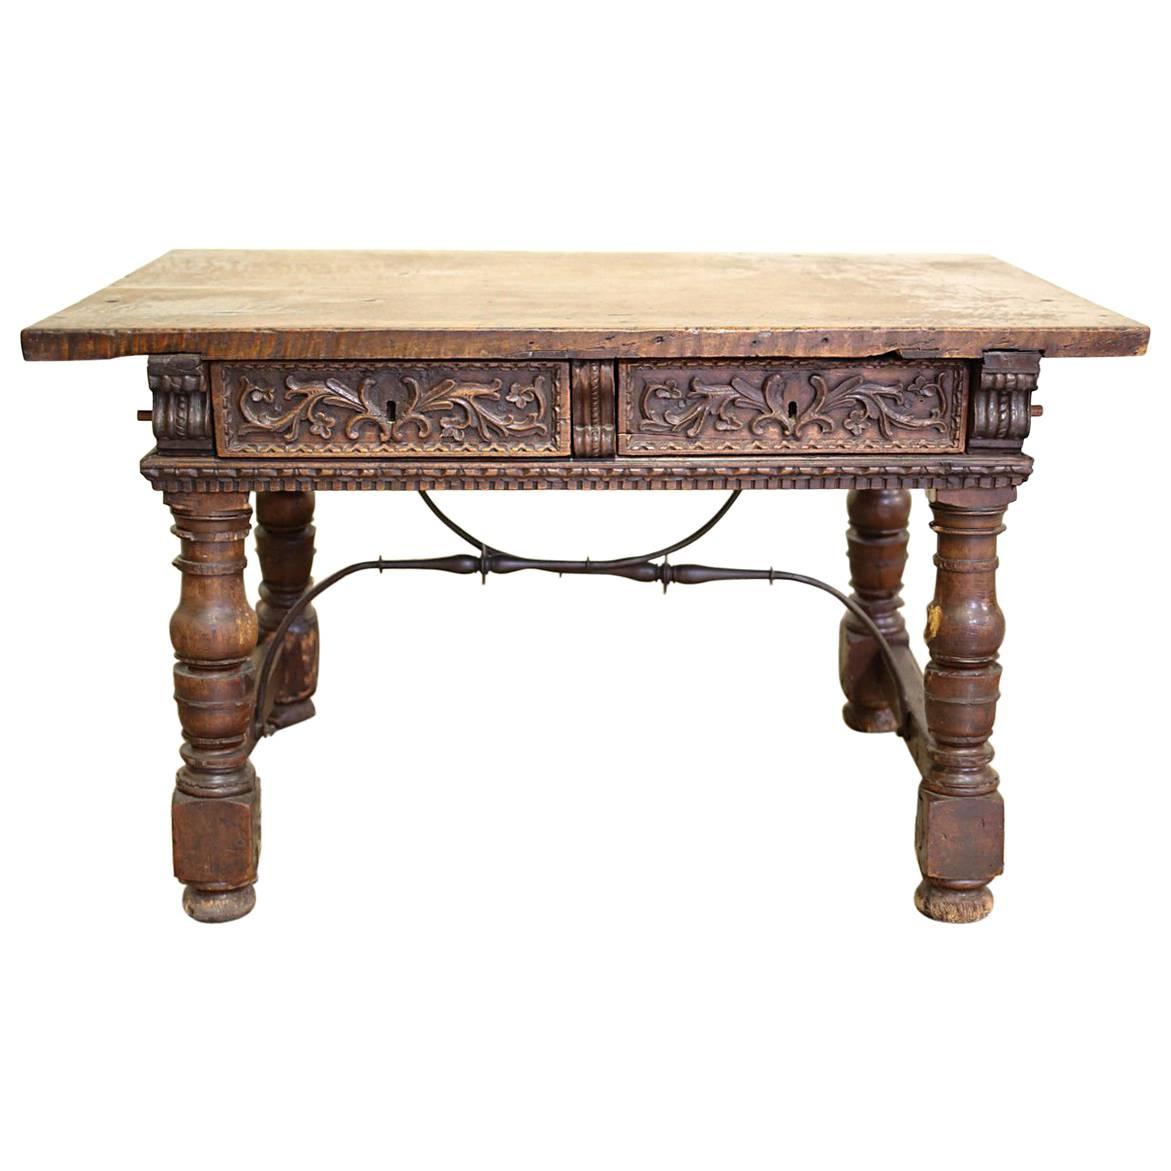 18th Century Continental Rustic Desk Possibly Italian with Iron Supports For Sale